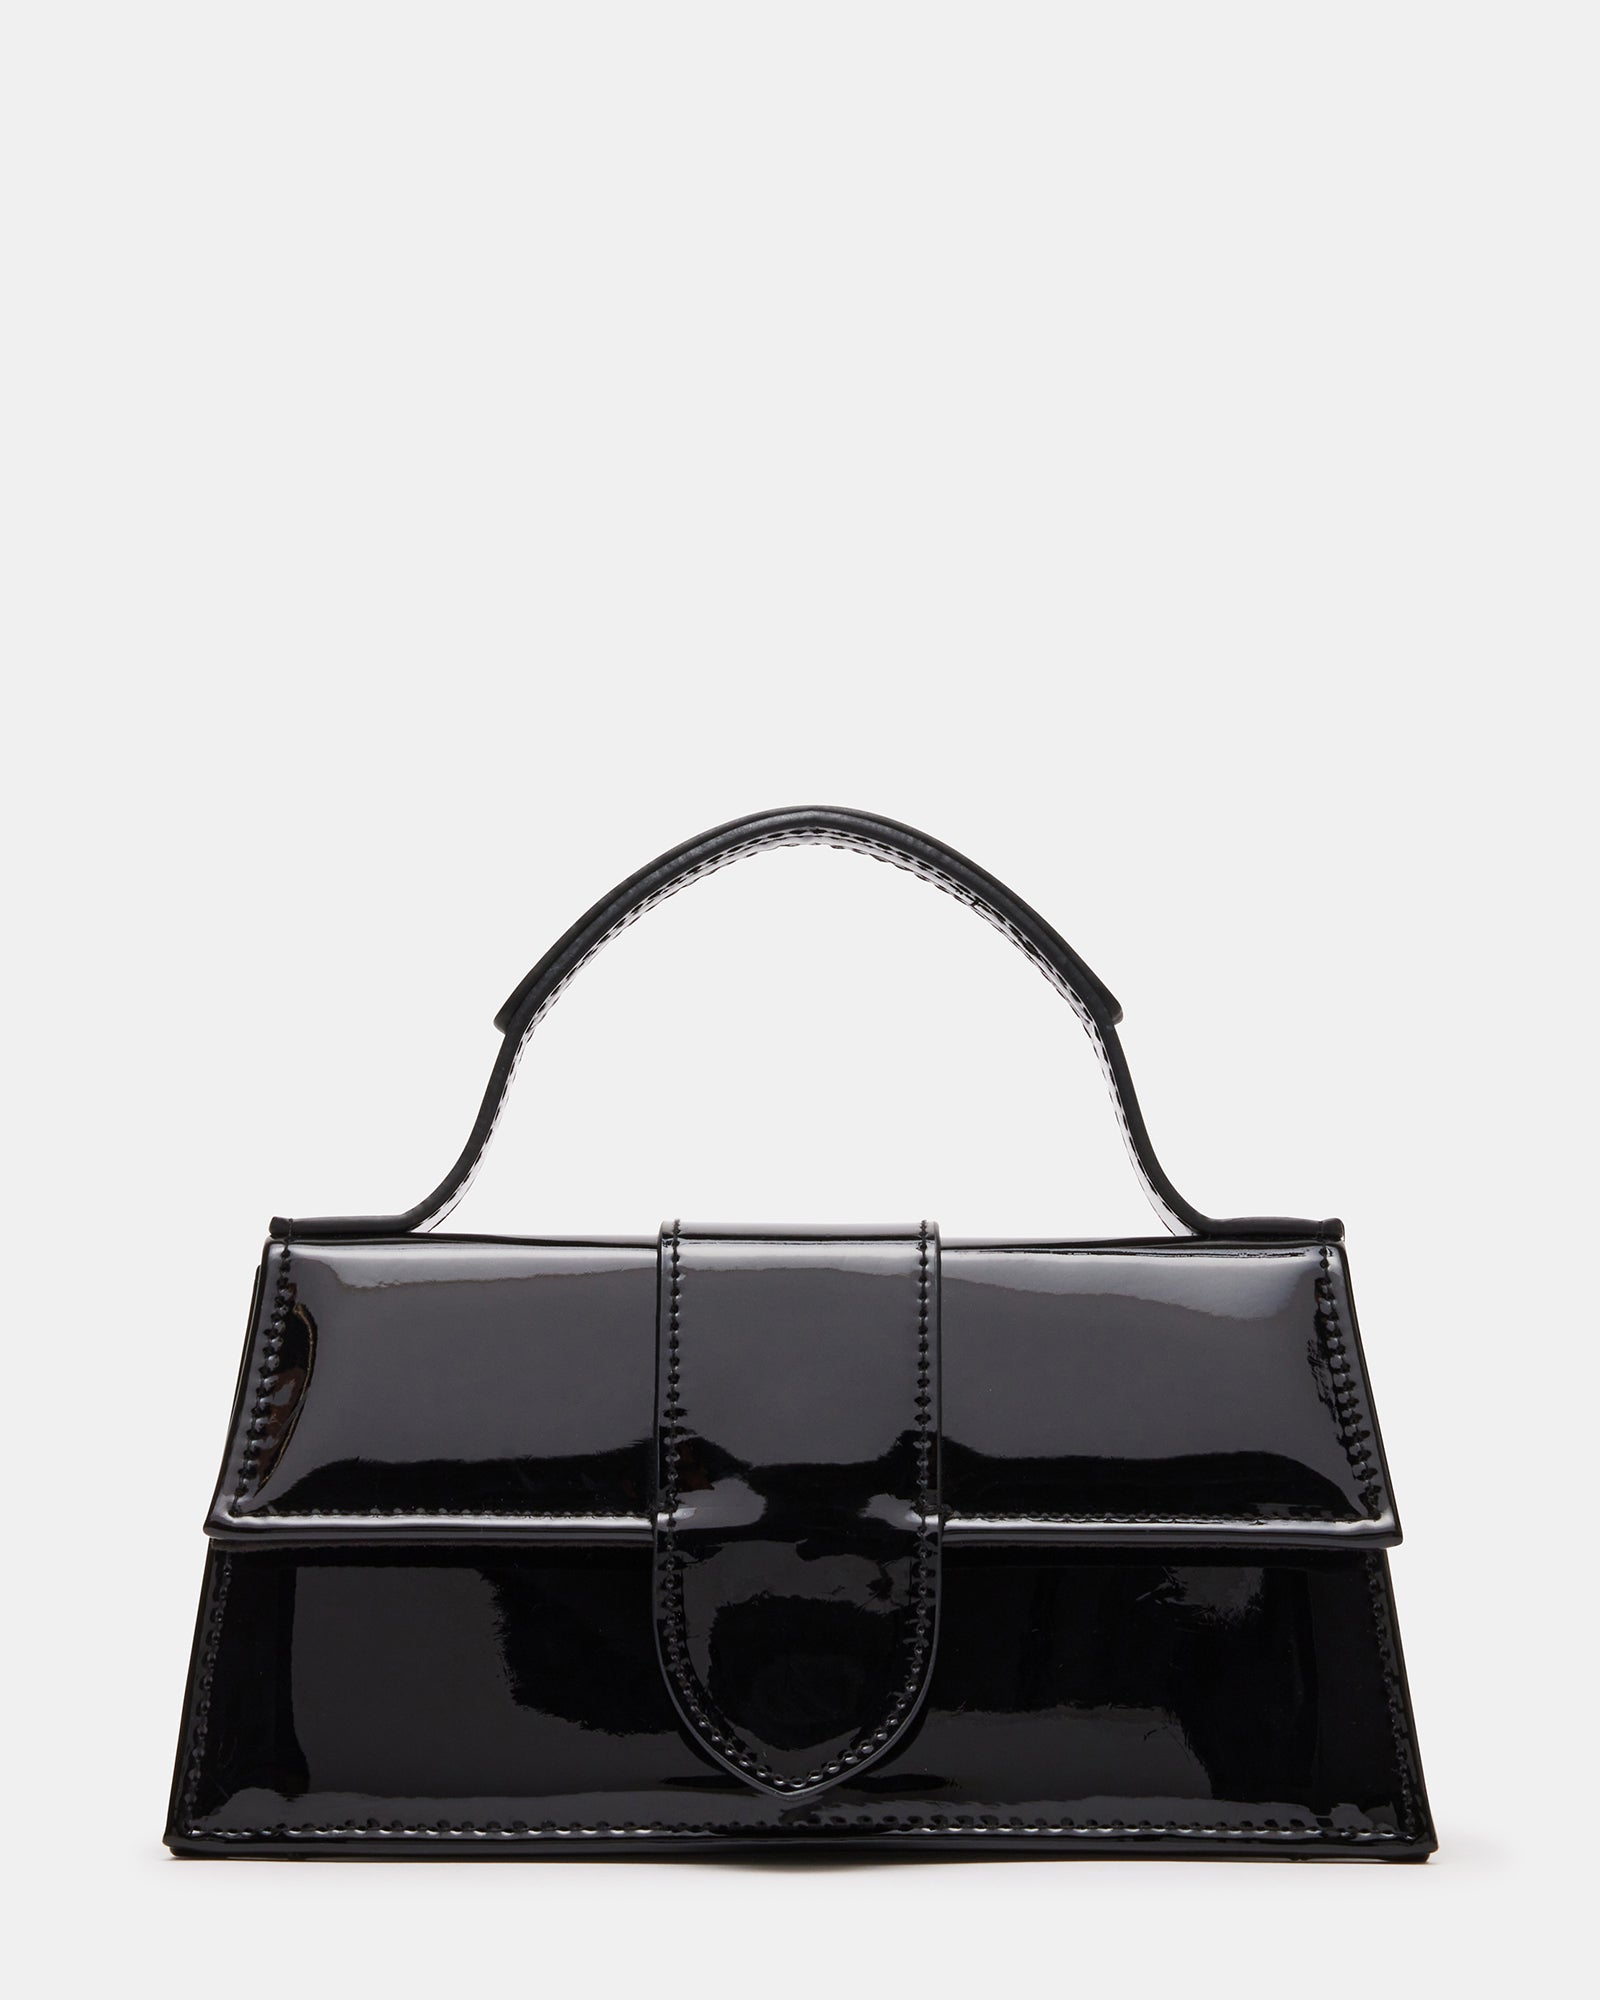 7 inch Patent Leather Crossbody Bag in Black